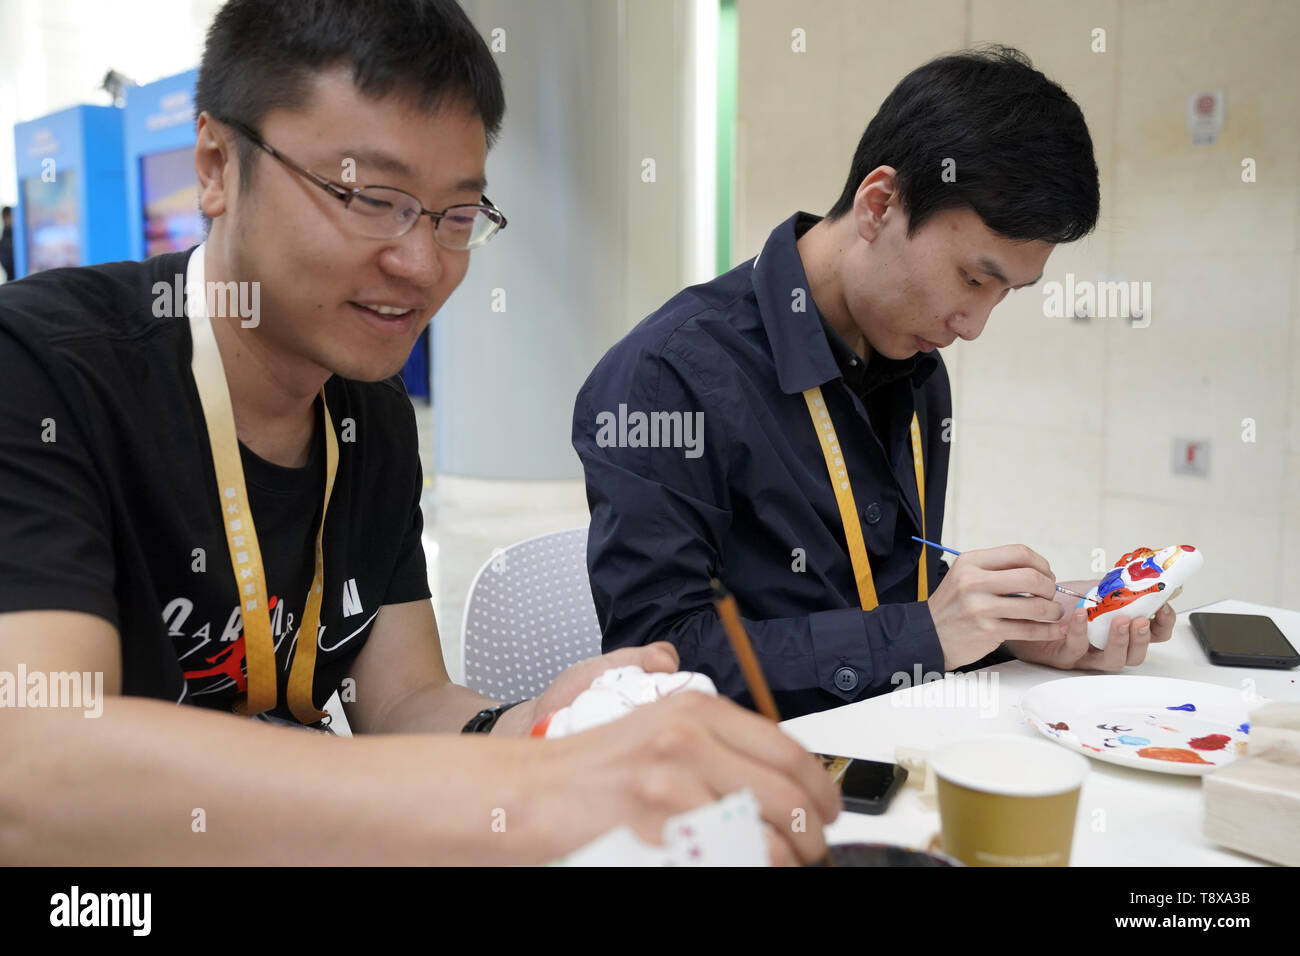 Beijing, China. 15th May, 2019. People paint clay sculptures at the intangible cultural heritage interactive area of the media center of the Conference on Dialogue of Asian Civilizations (CDAC) in the China National Convention Center in Beijing, capital of China, May 15, 2019. The opening ceremony of the CDAC was held here Wednesday. Credit: Shen Bohan/Xinhua/Alamy Live News Stock Photo